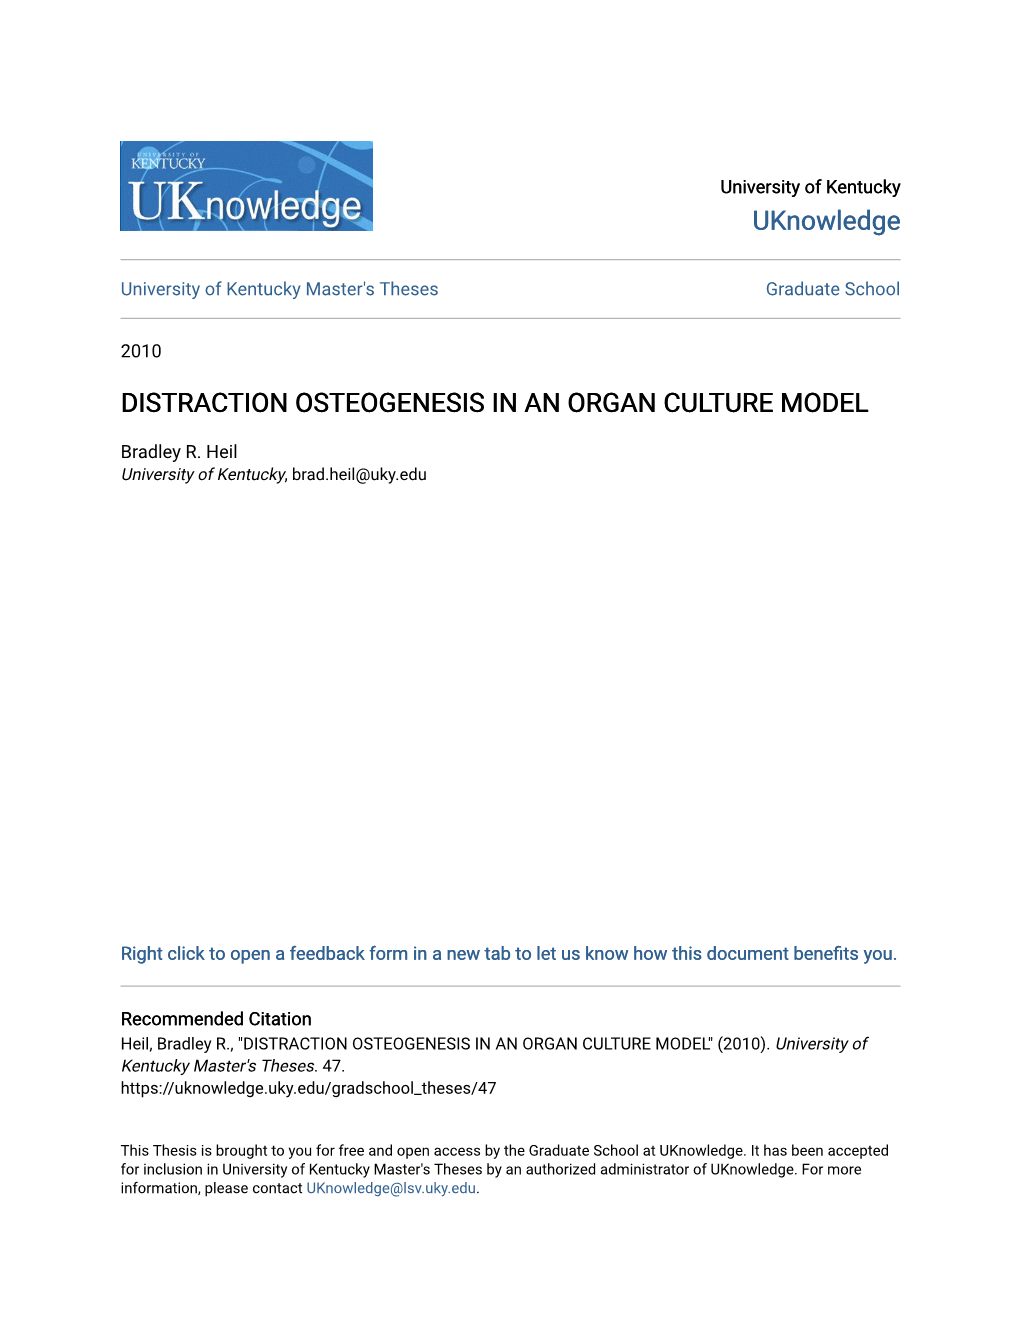 Distraction Osteogenesis in an Organ Culture Model